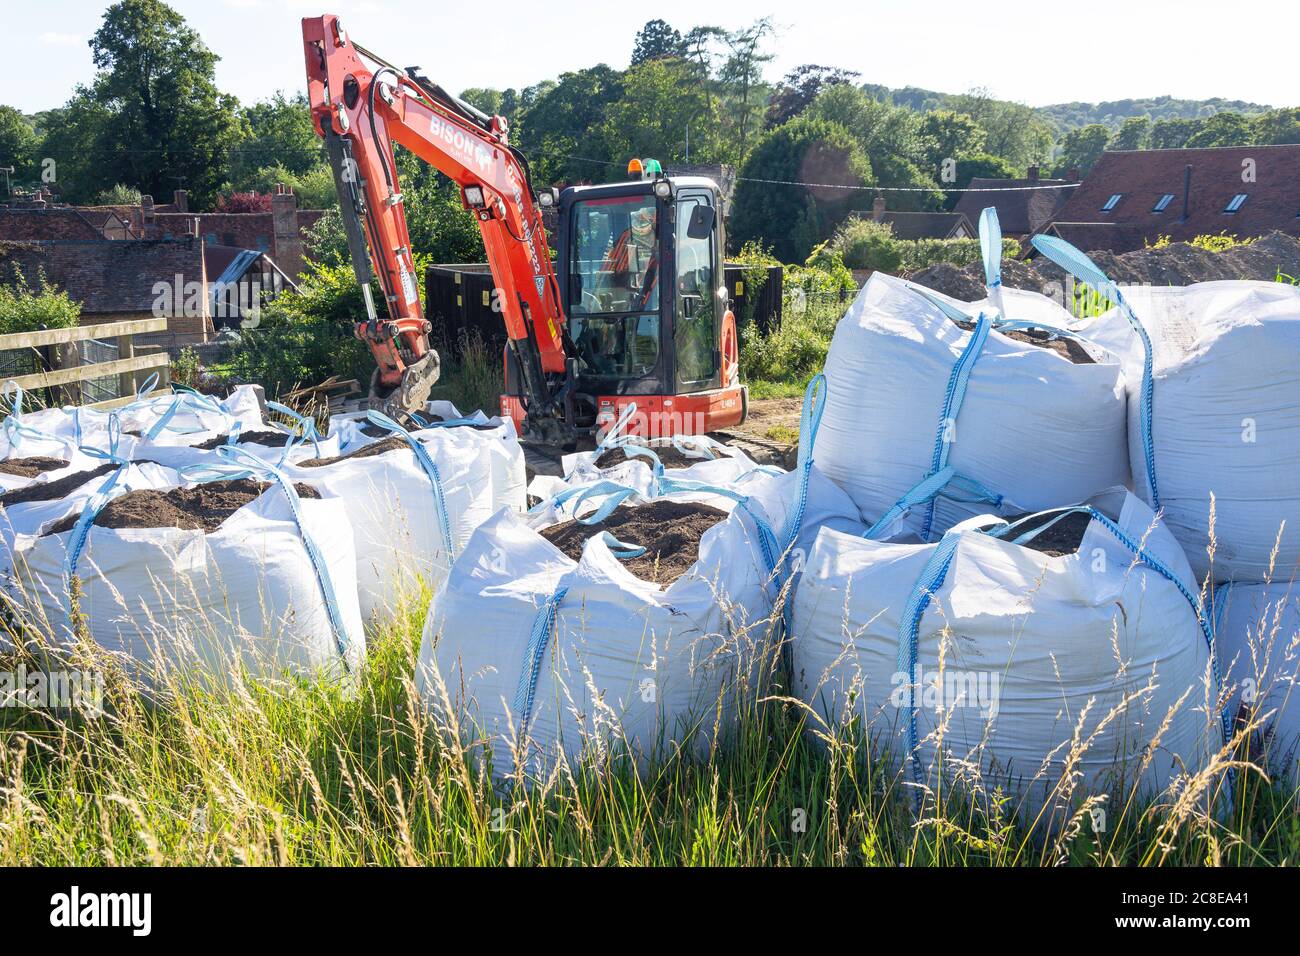 Tracked excavator and bags of earth in field, Turville, Buckinghamshire, England, United Kingdom Stock Photo